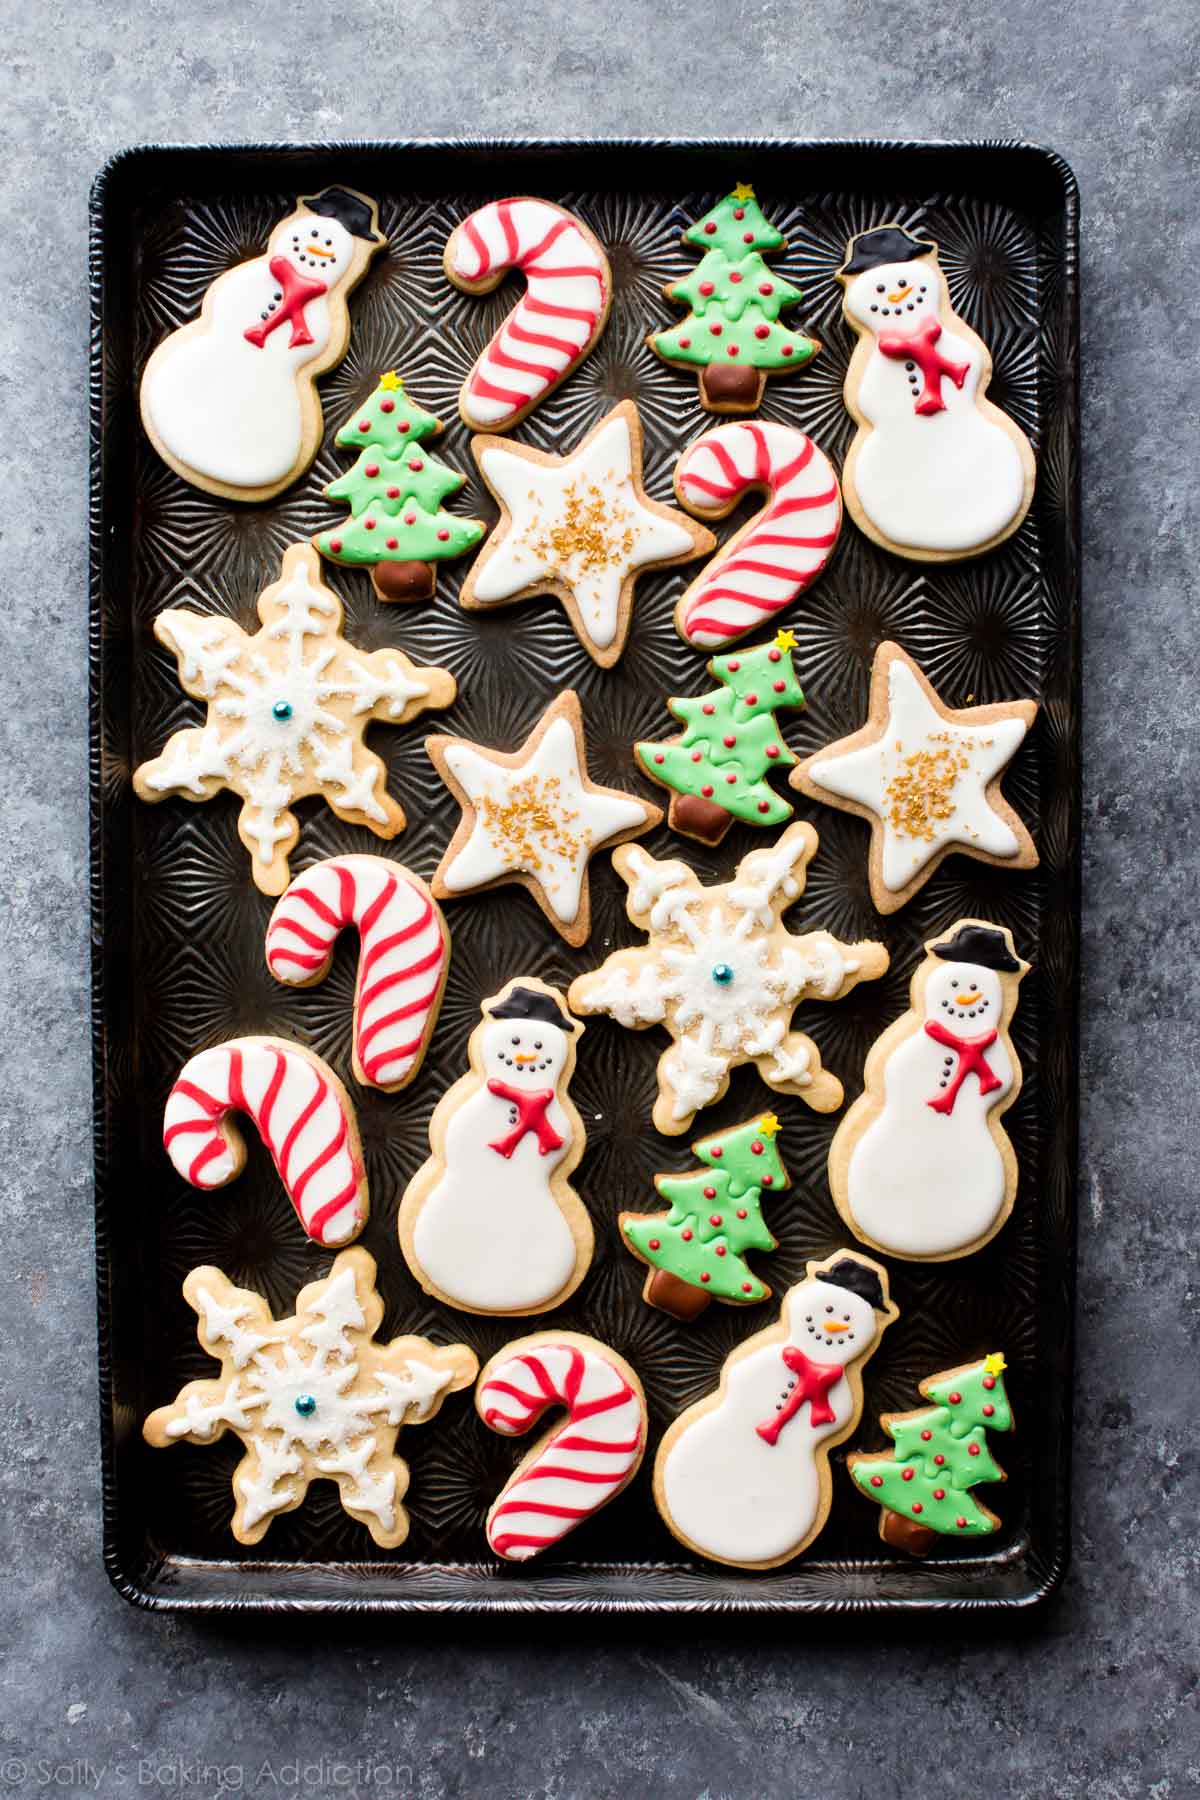 Christmas holiday decorated sugar cookies including snowmen, candy canes, Christmas trees, snowflakes, and stars